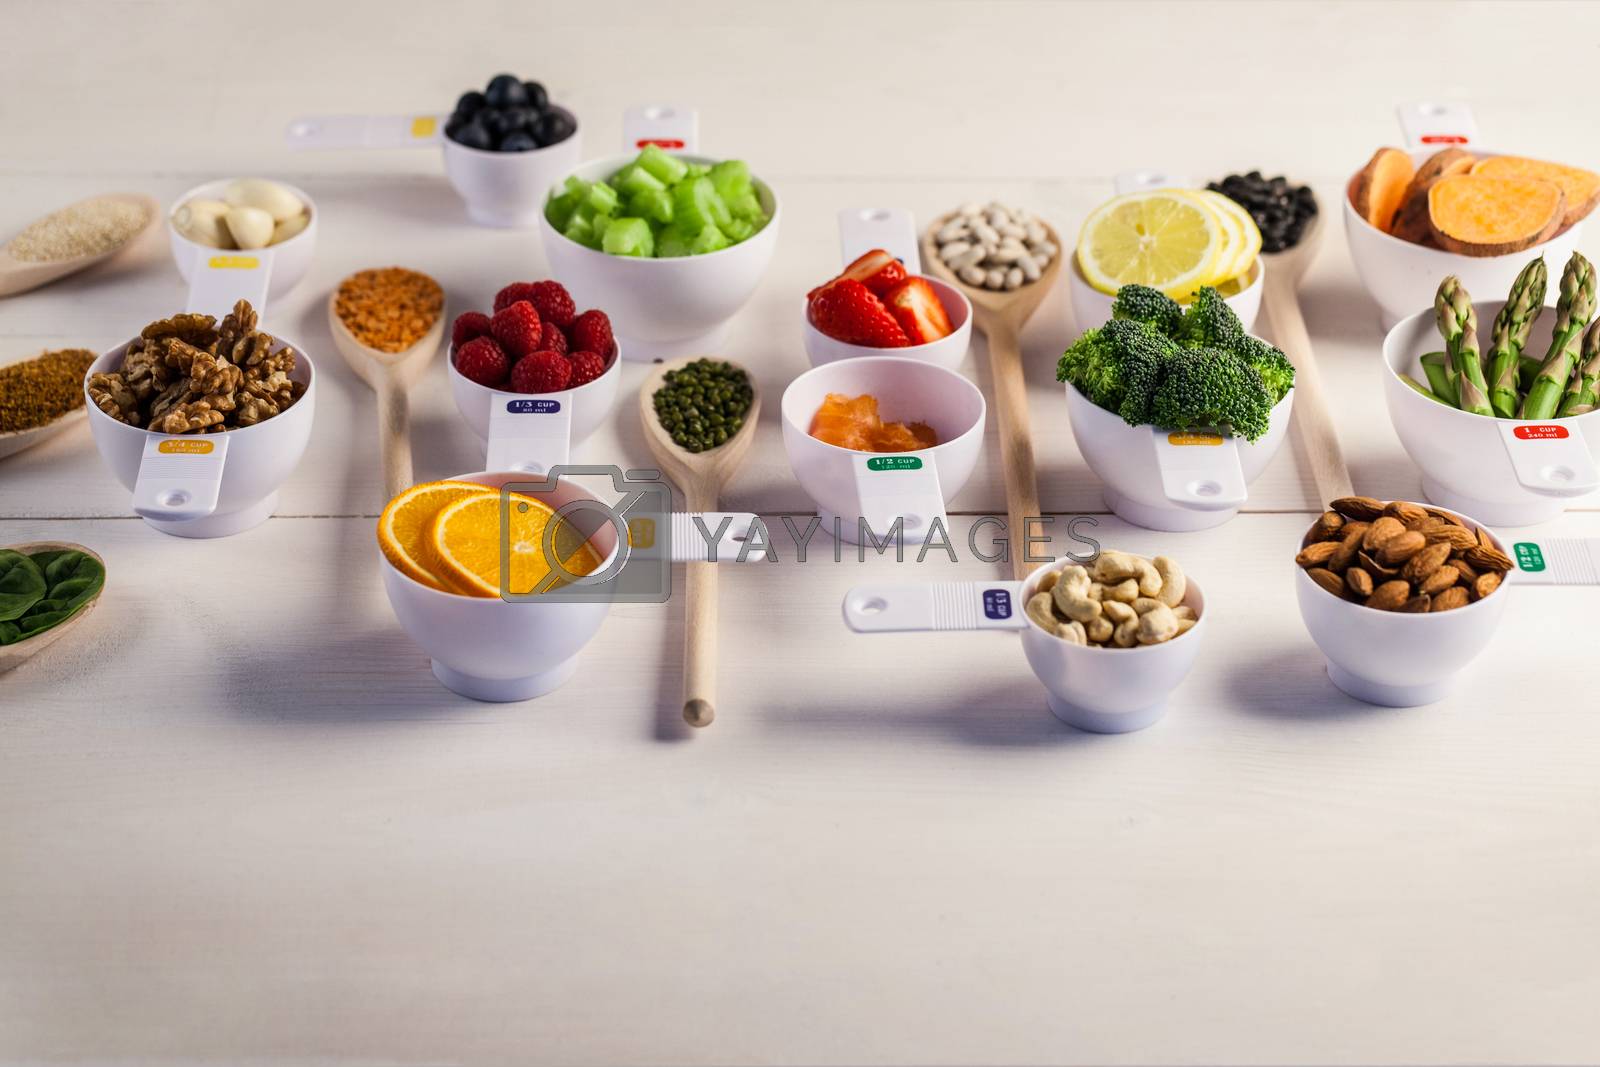 Royalty free image of Portion cups of healthy ingredients by Wavebreakmedia